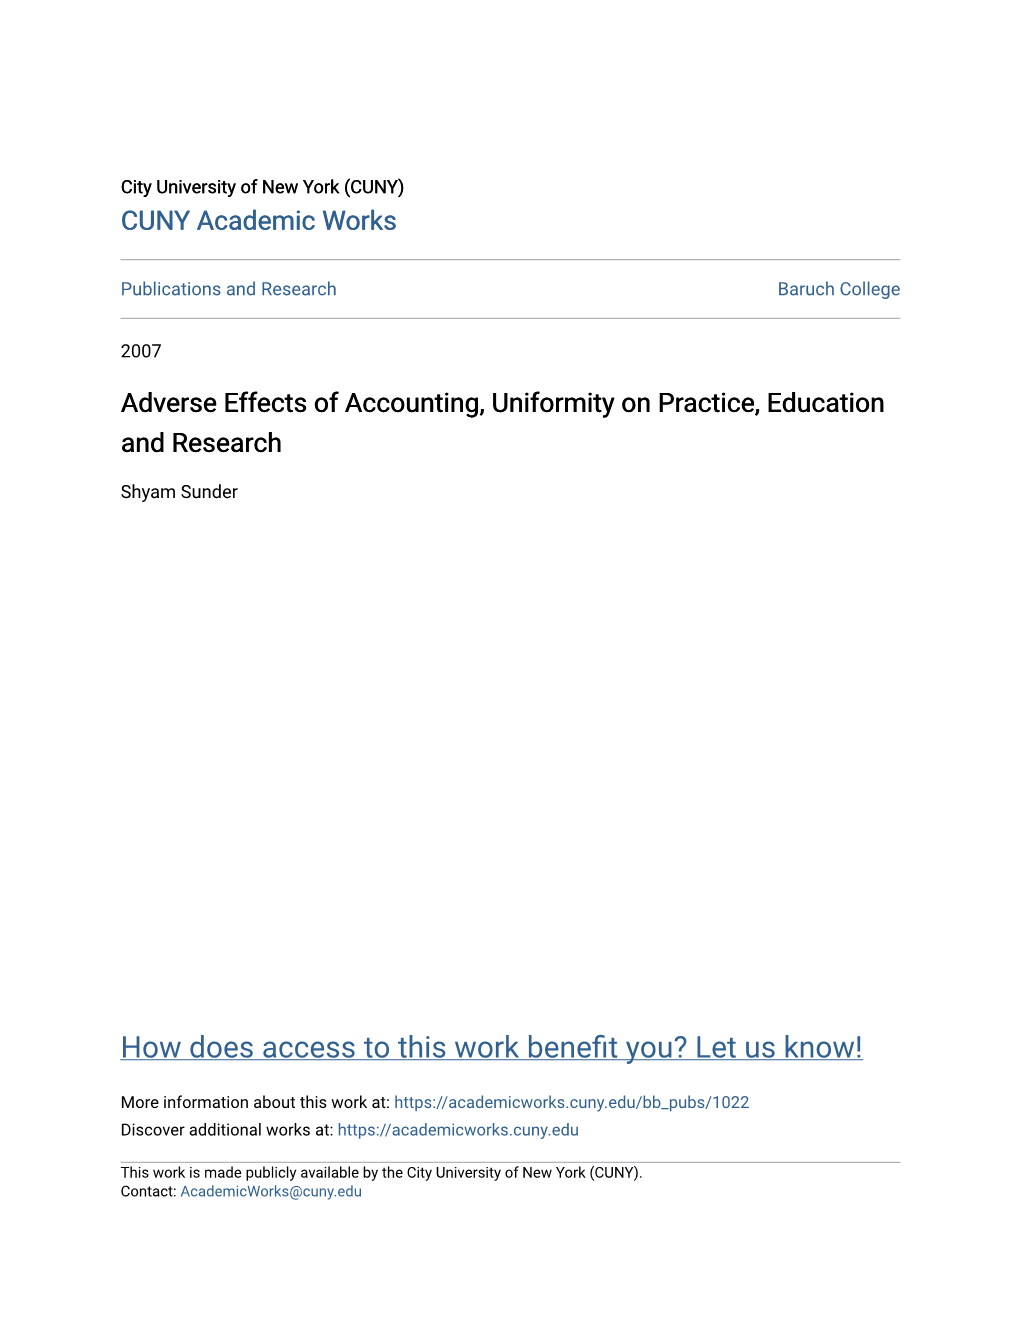 Adverse Effects of Accounting, Uniformity on Practice, Education and Research